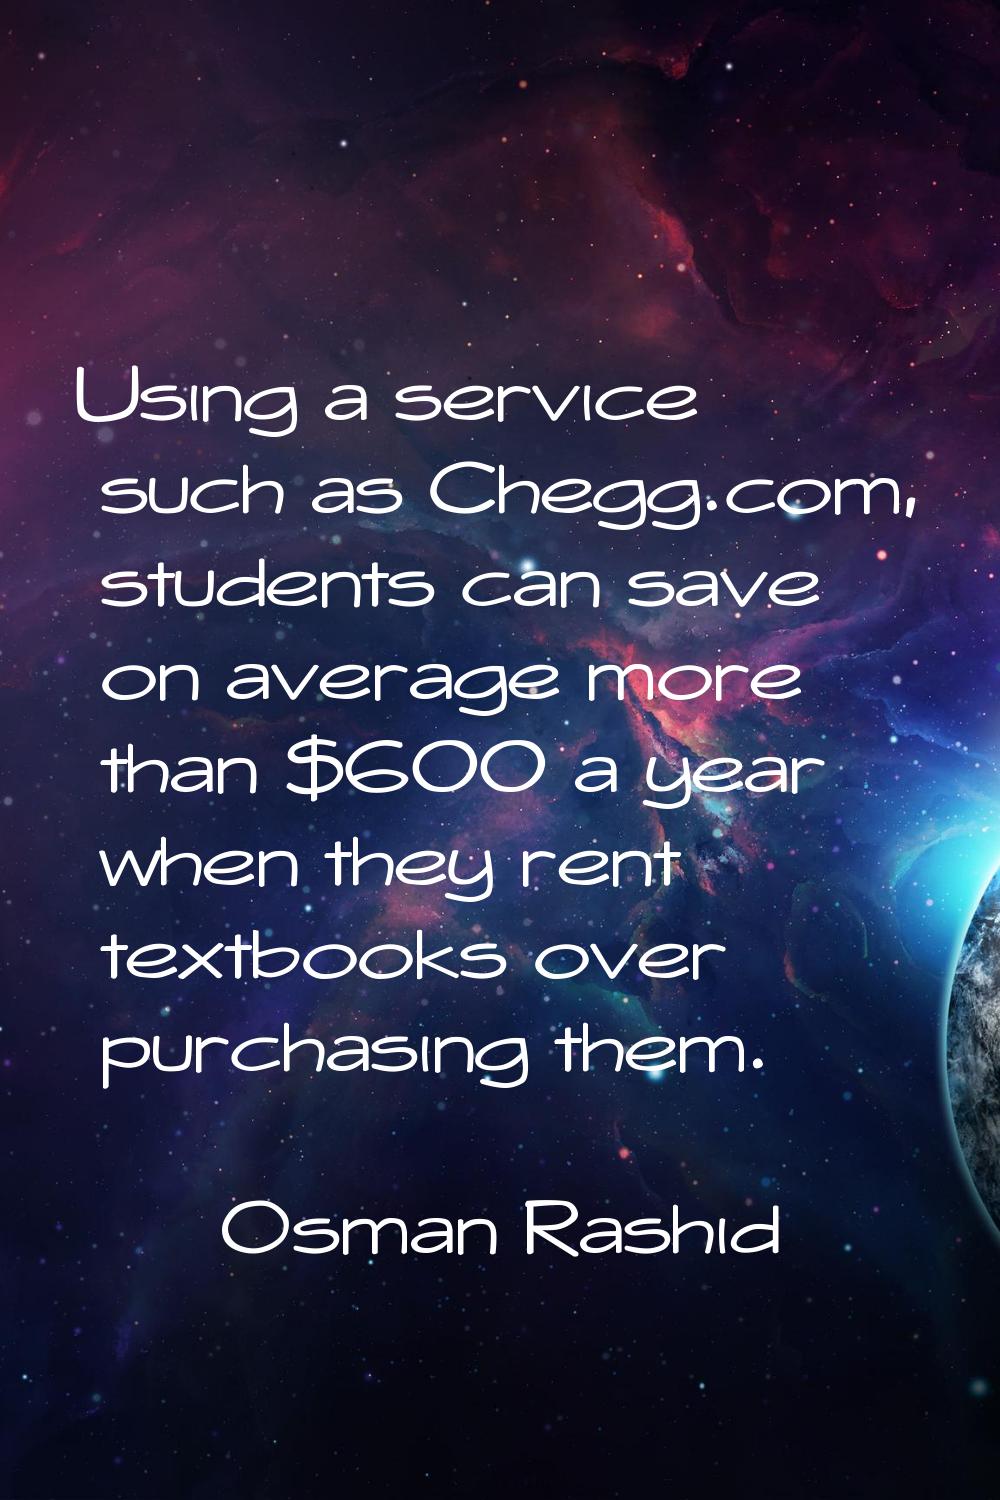 Using a service such as Chegg.com, students can save on average more than $600 a year when they ren